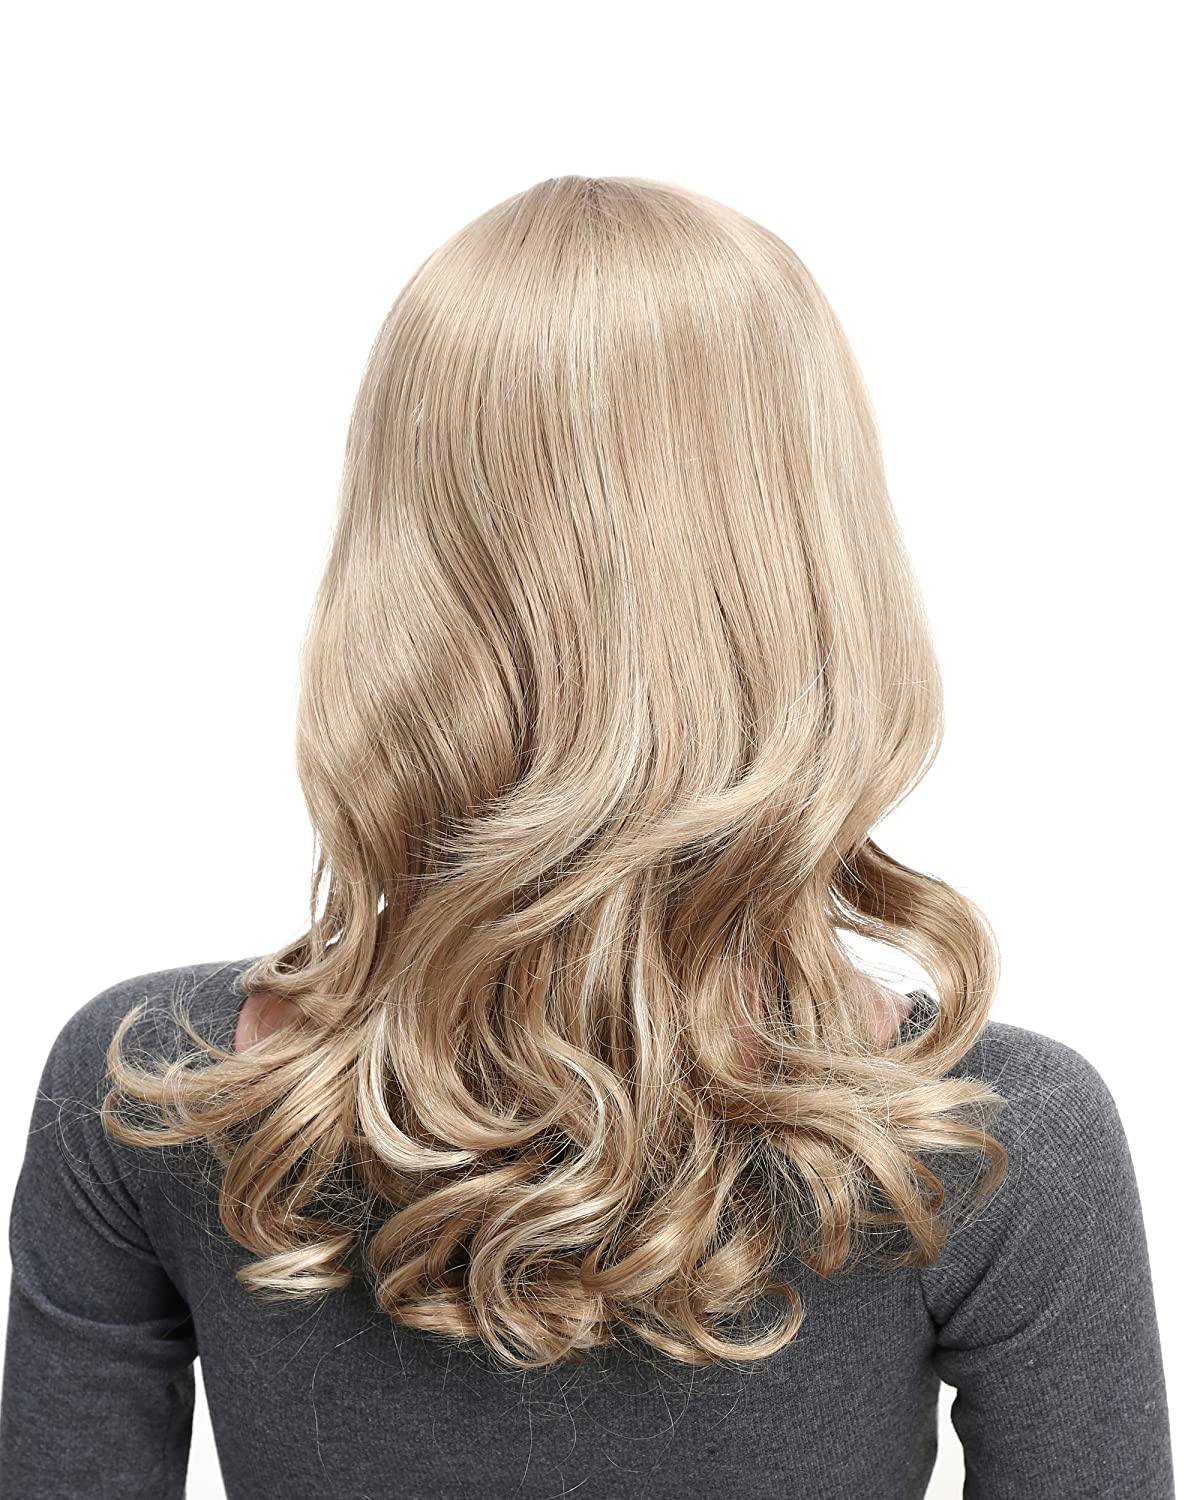 Onedor Full Head Beautiful Long Curly Wave Stunning Wig Charming Curly Costume Wigs with Fringe (24H613 Blonde Highlights) - image 3 of 6